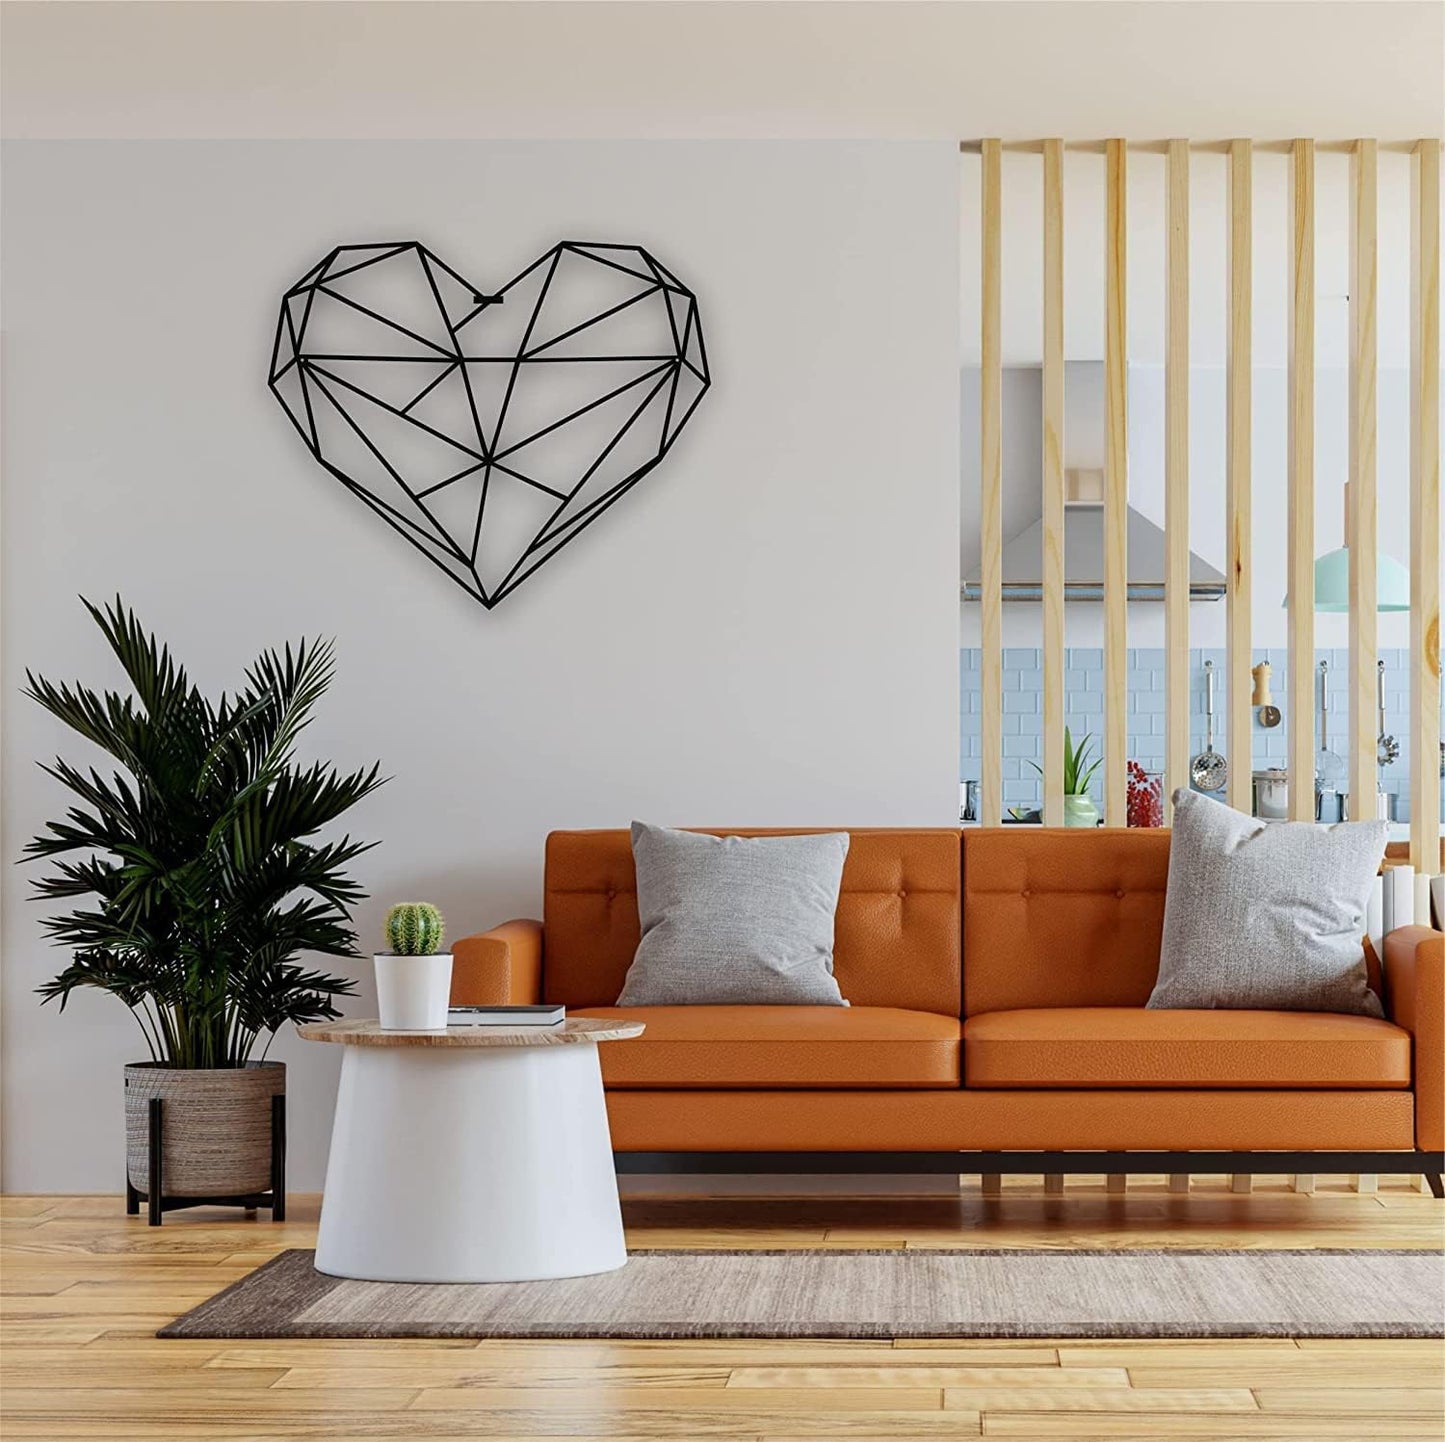 COOLBABY WWG42 Black Geometric Heart Wall Sticker for Home Decor Shaped Art Modern | Living Room WWG42-SRK - COOLBABY